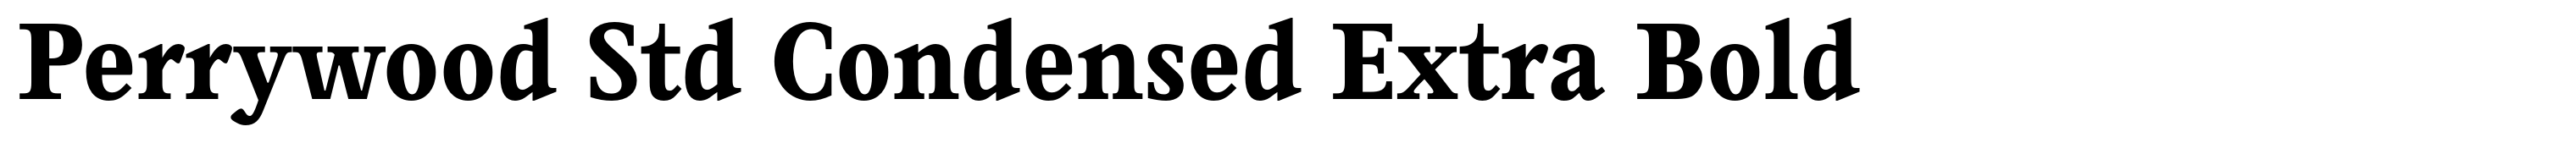 Perrywood Std Condensed Extra Bold